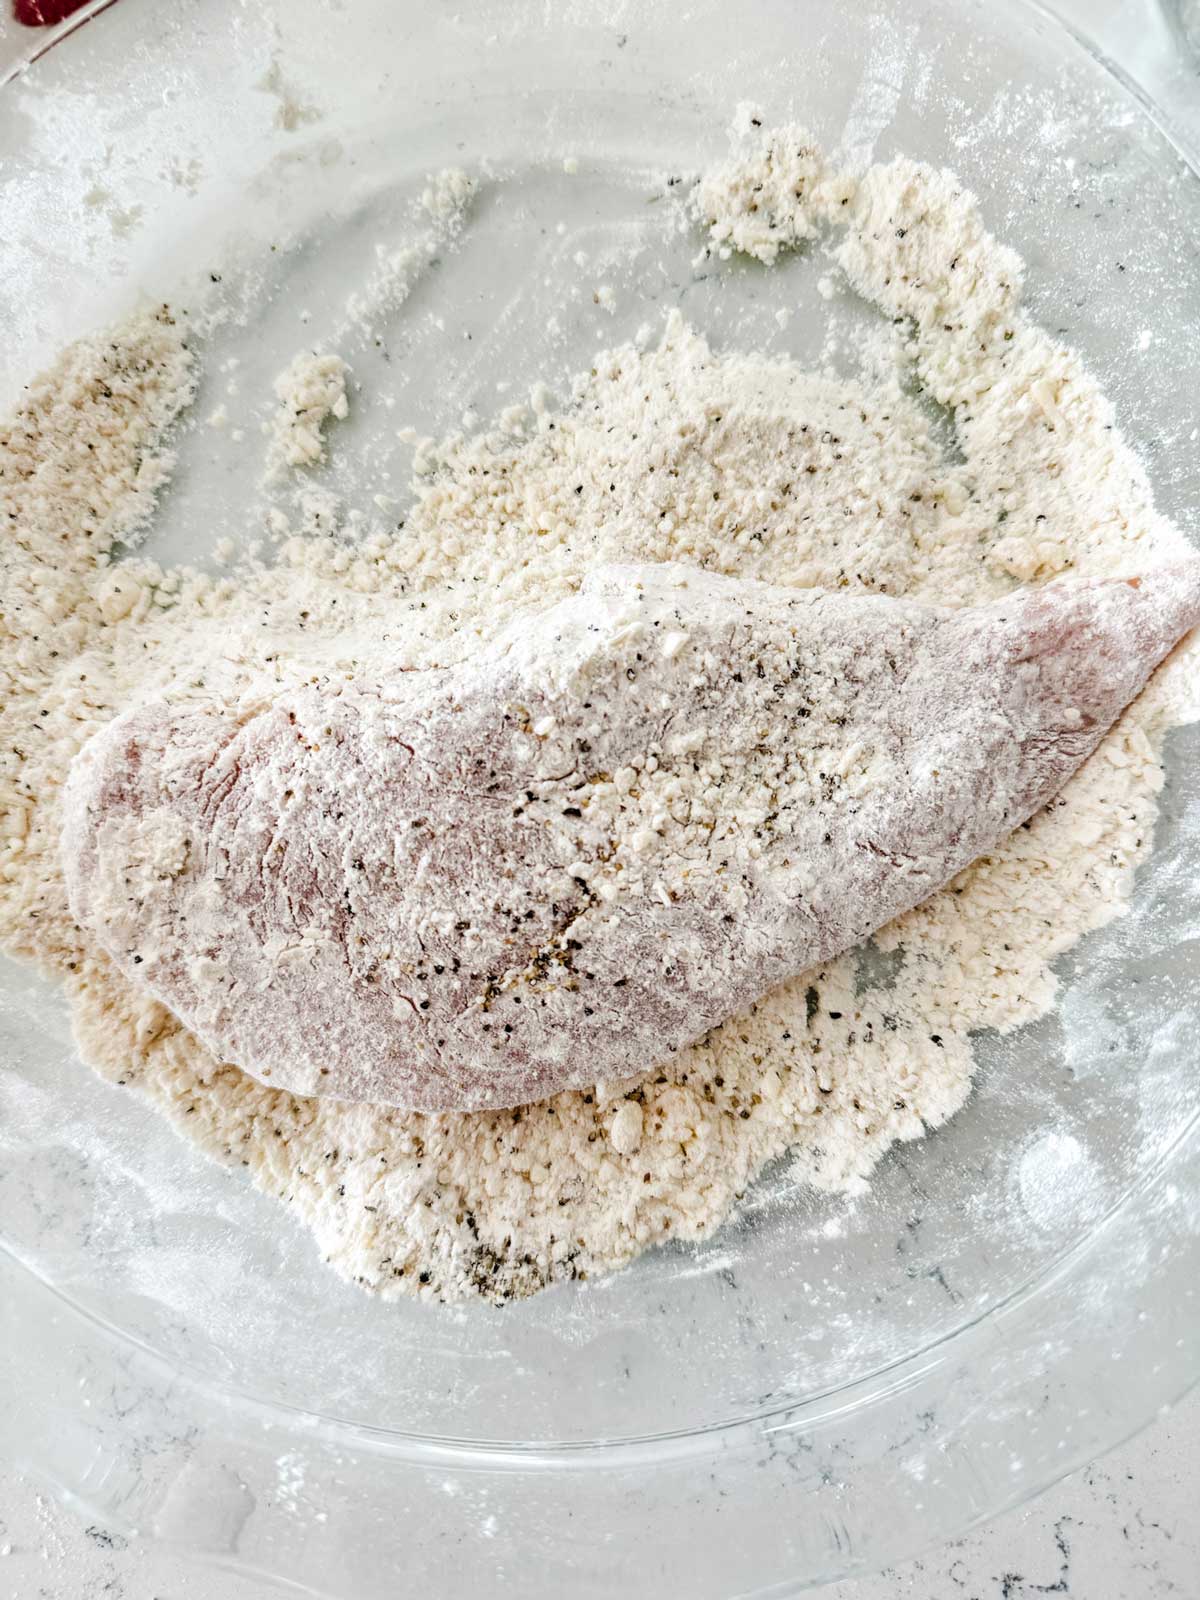 Chicken being dredged in a flour coating.